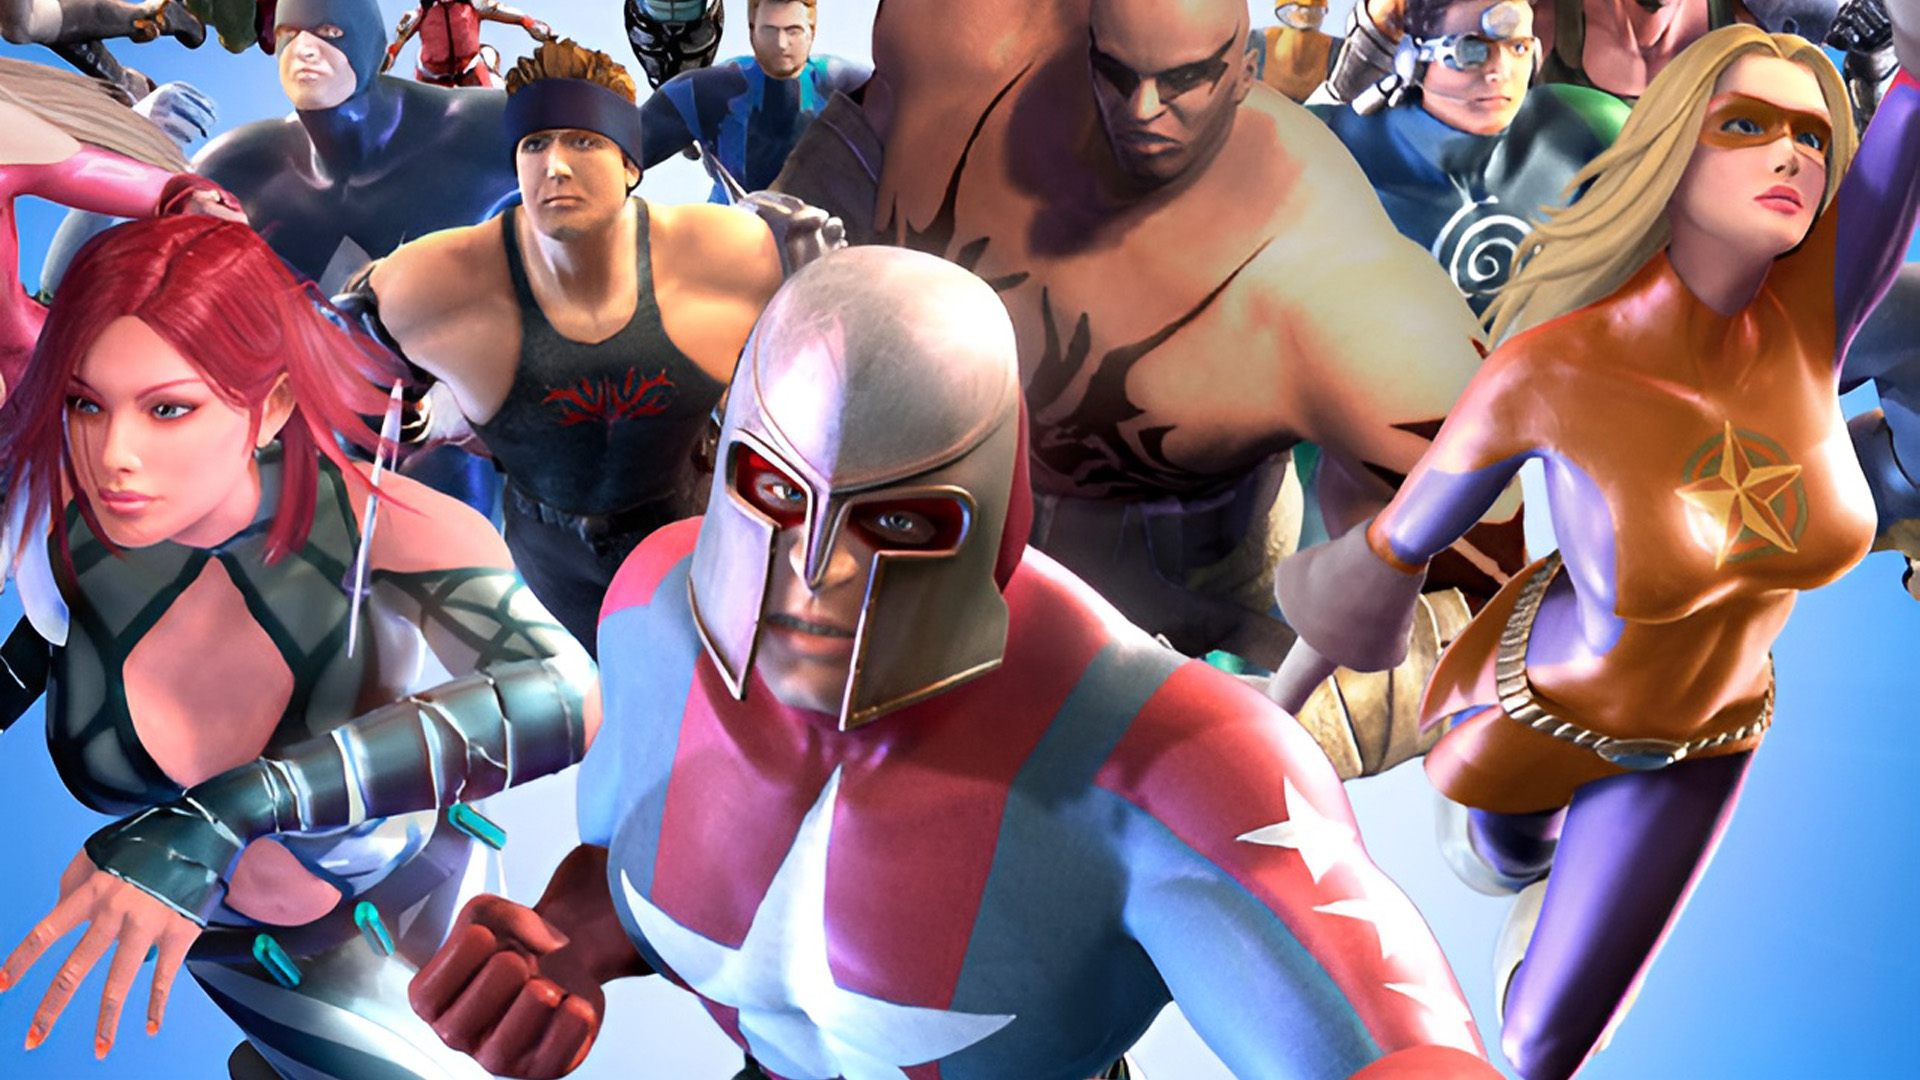 Forget Suicide Squad, this long-dead superhero MMORPG lives again